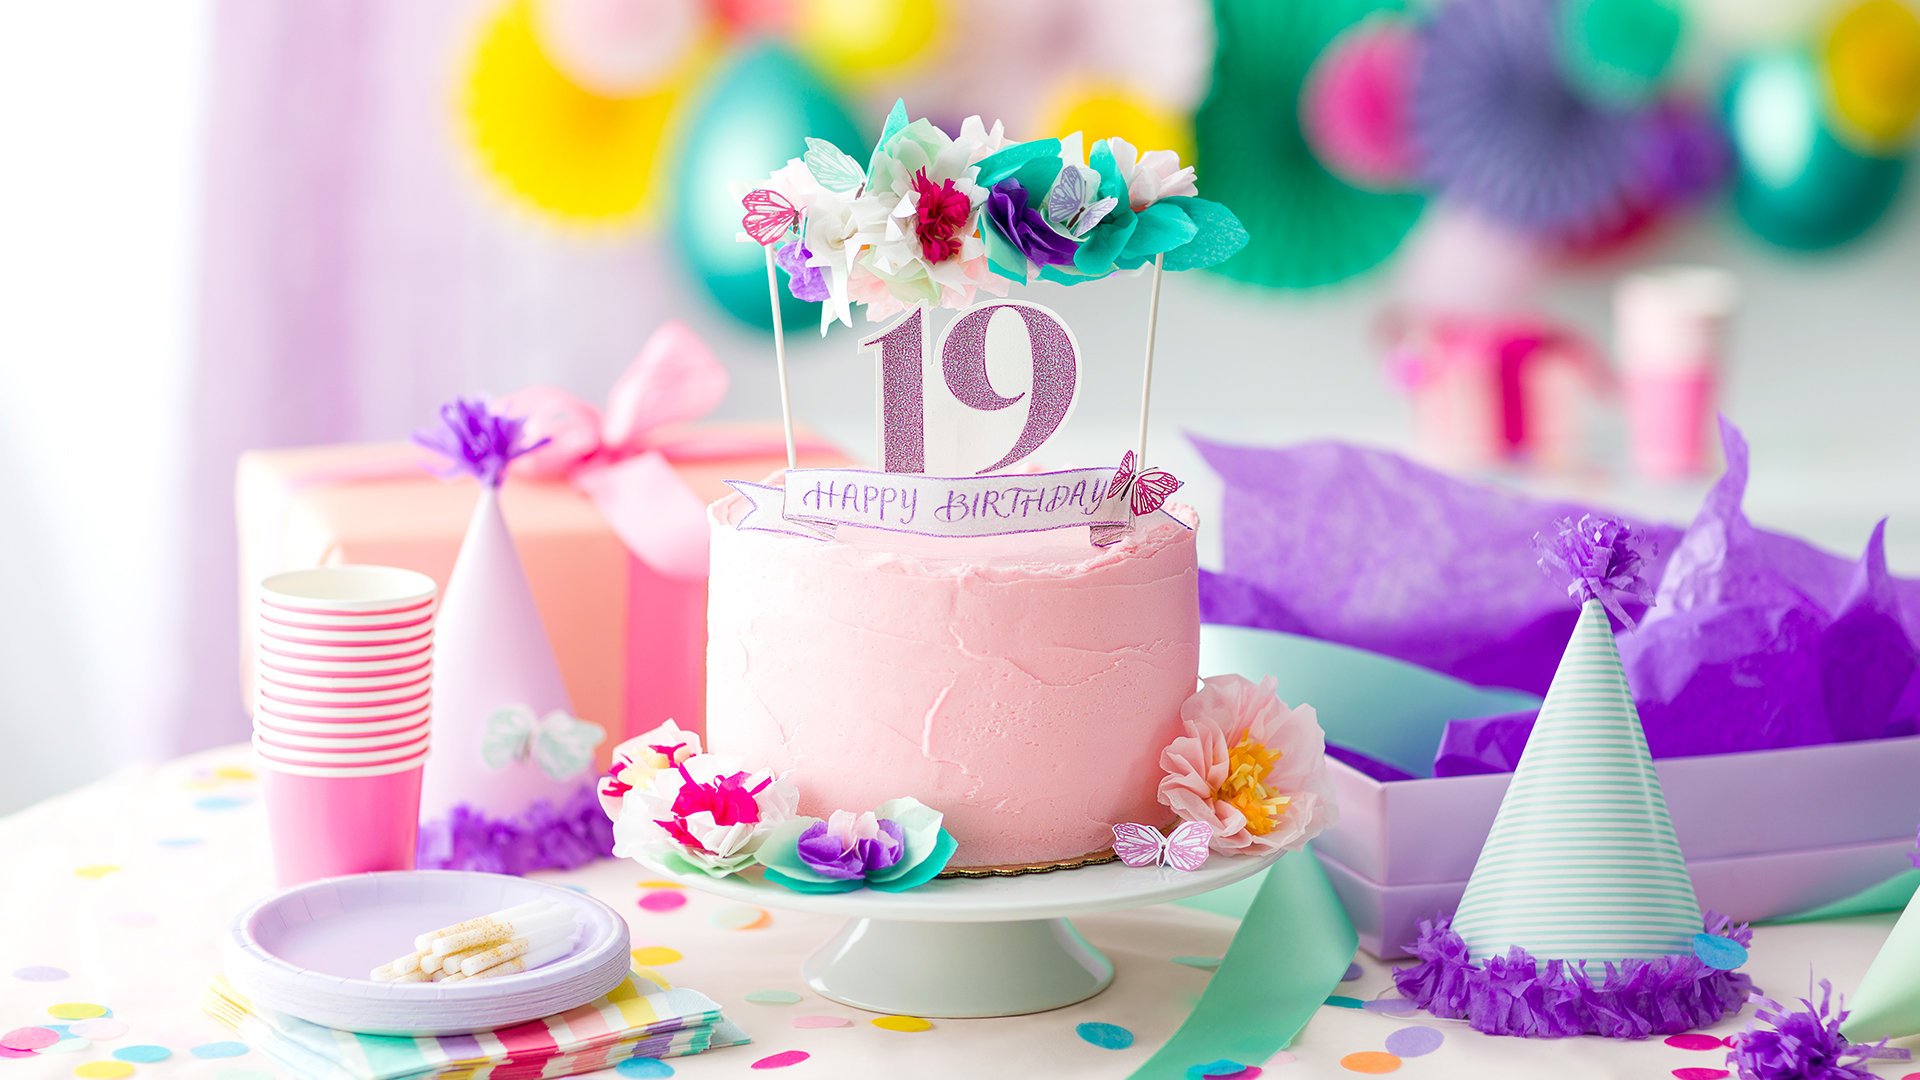 A table full of Birthday party décor with a pink cake that has the numbers 19 and a happy birthday floral sign with a butterfly to celebrate scentsy's 19th birthday